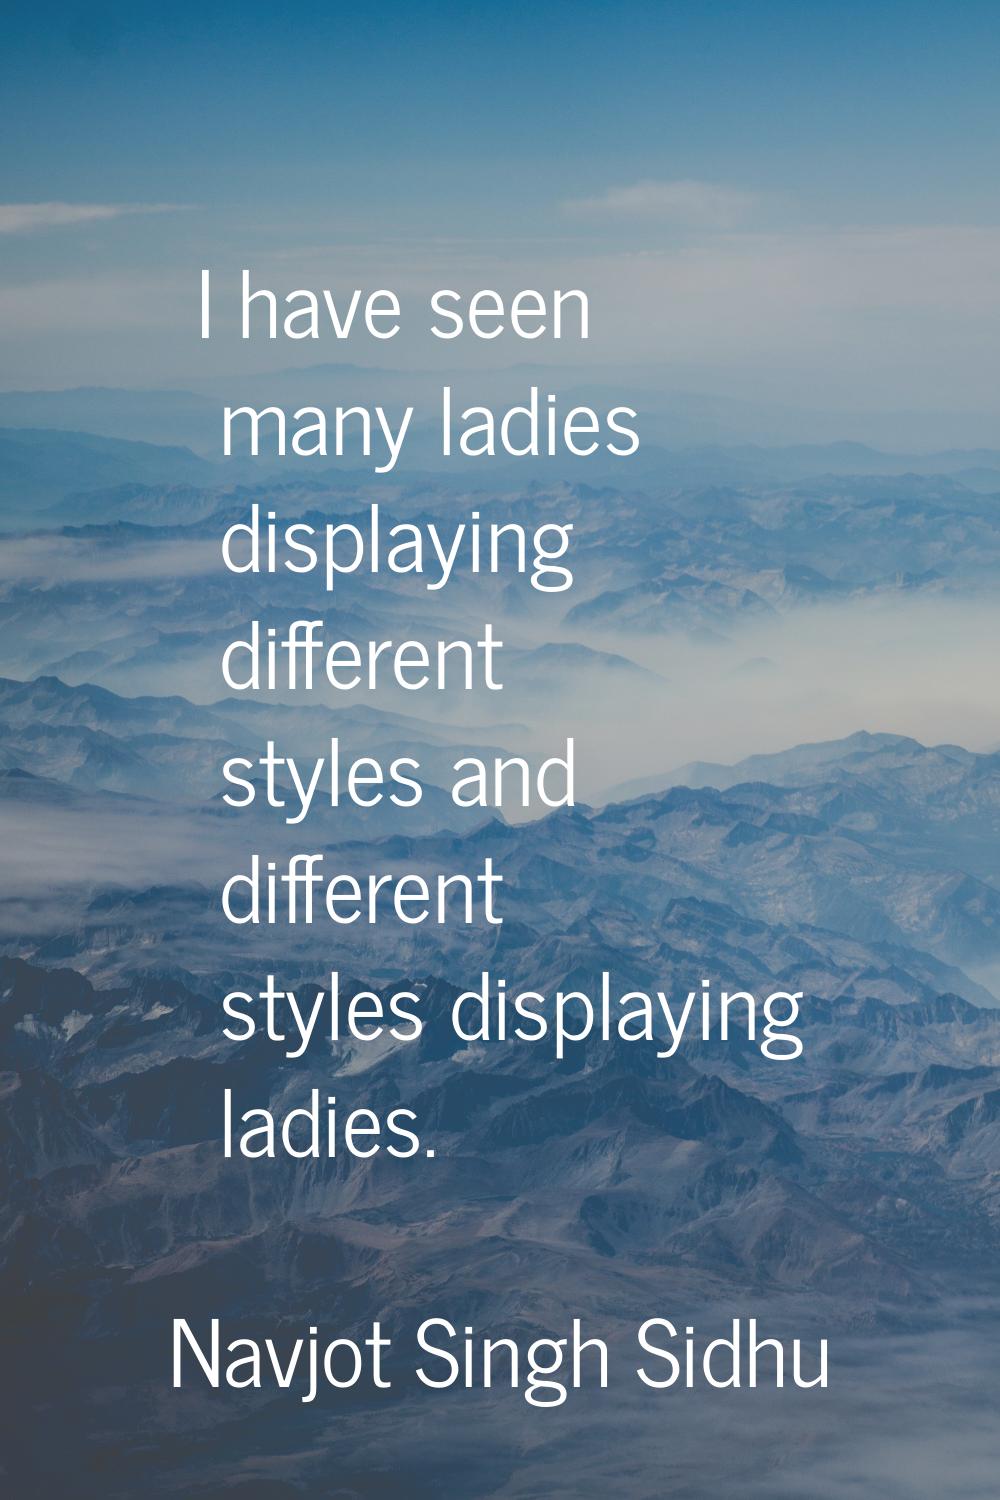 I have seen many ladies displaying different styles and different styles displaying ladies.